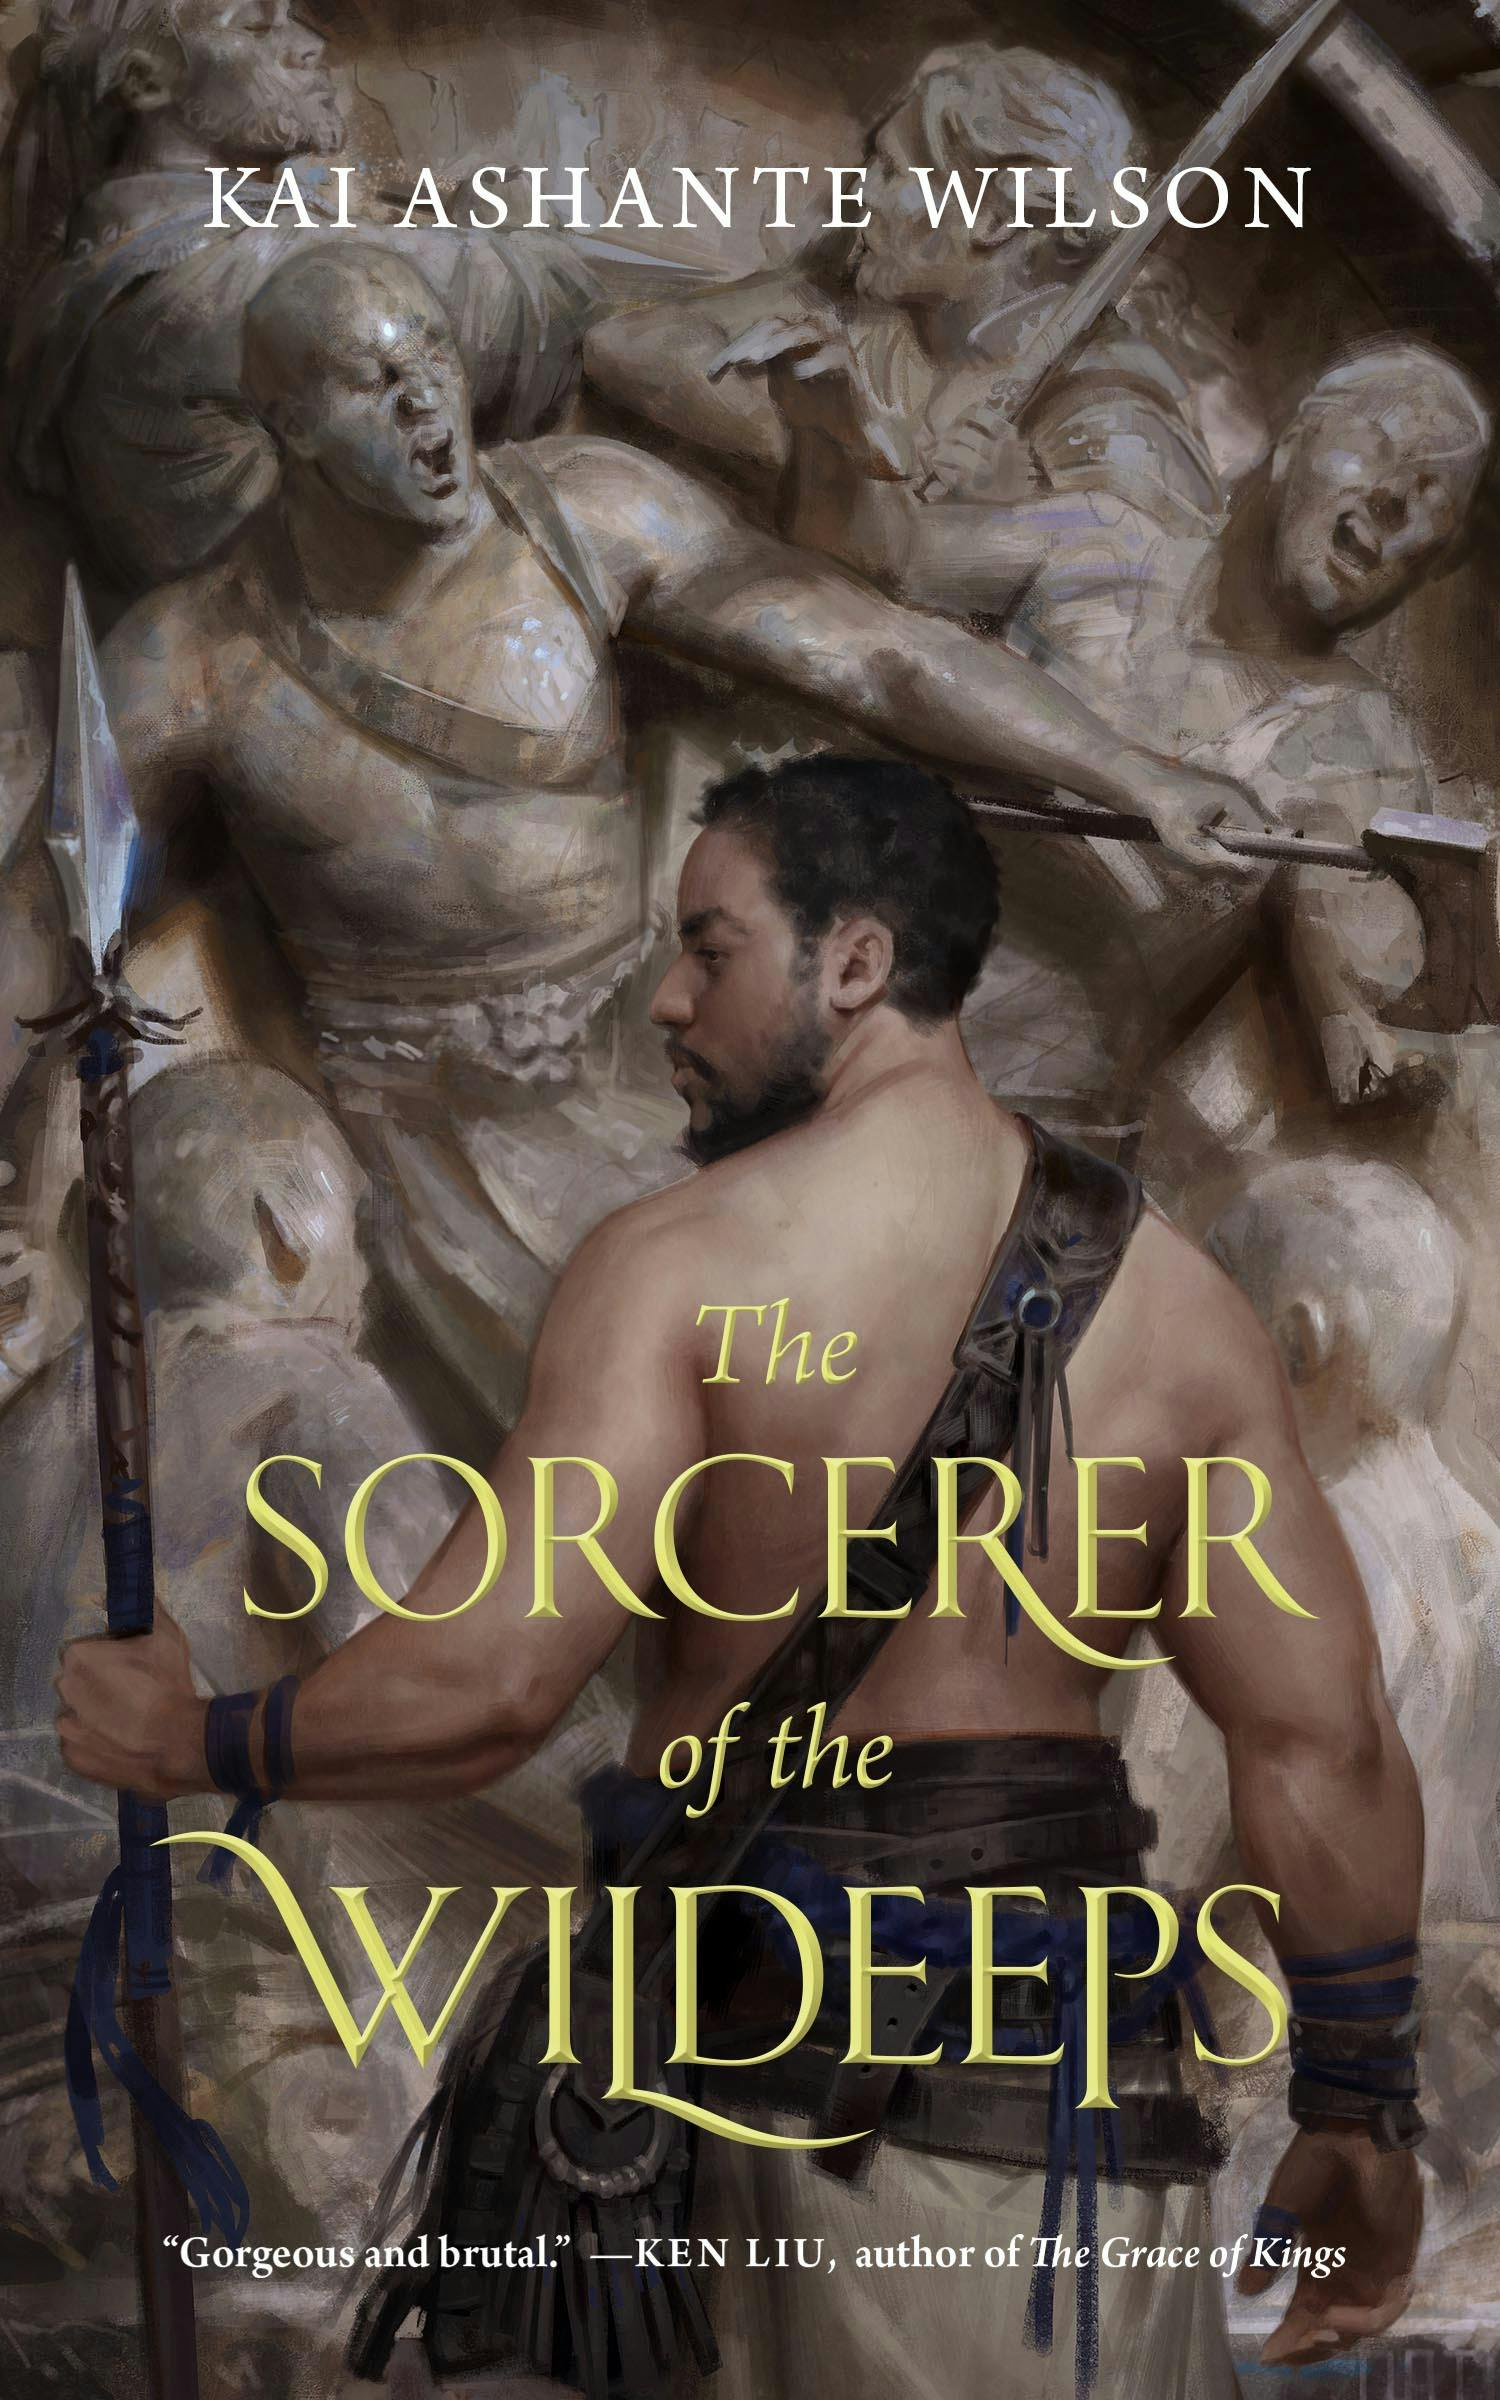 Cover for the book titled as: The Sorcerer of the Wildeeps